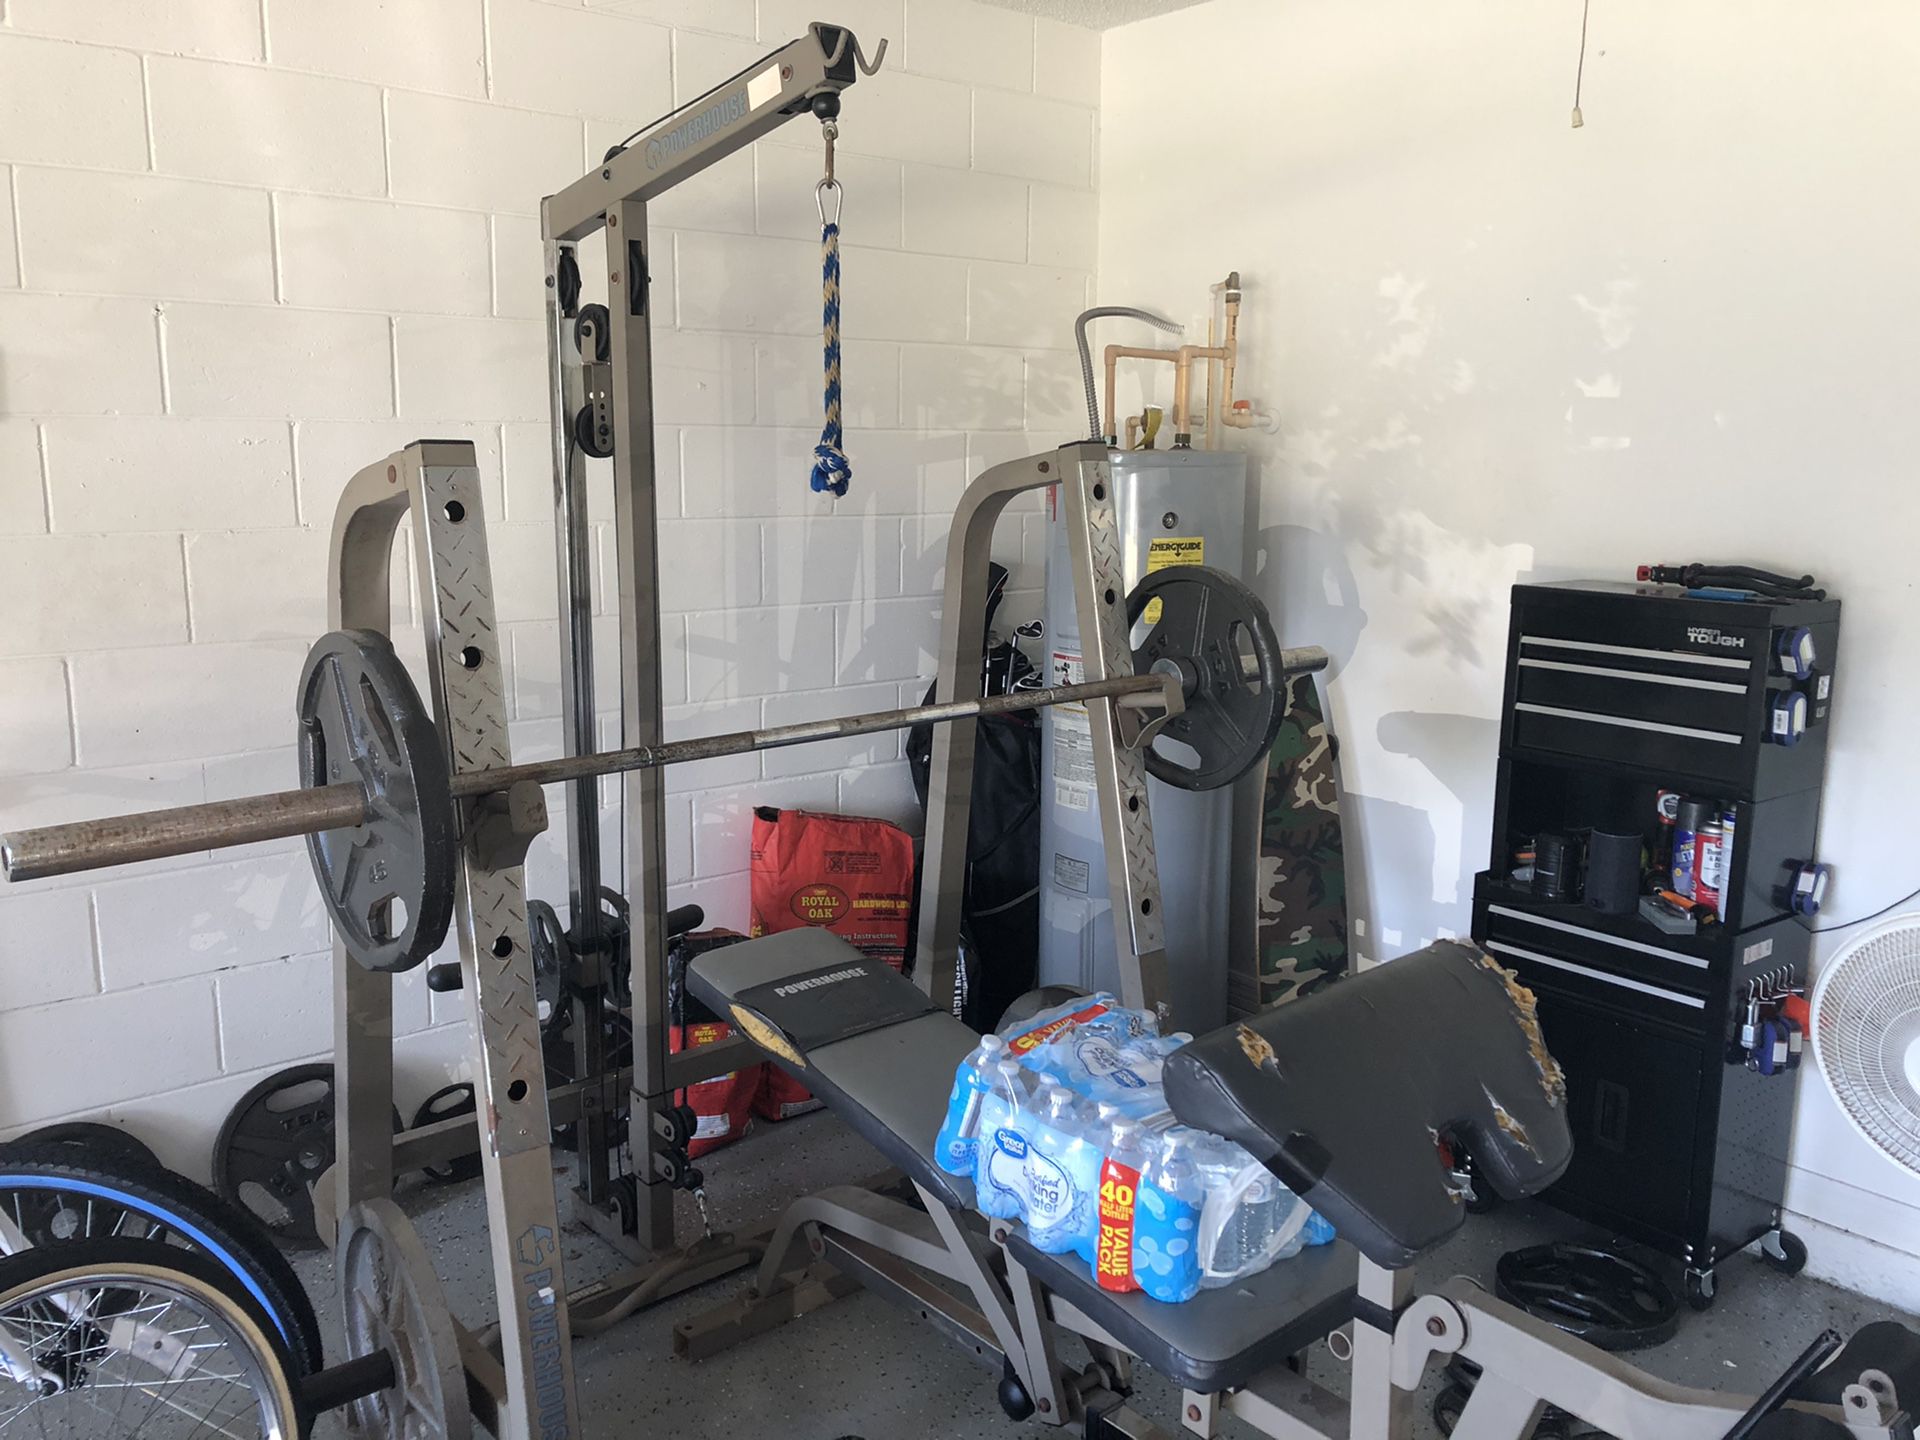 Weight bench and rack with 355 lbs of steel weight